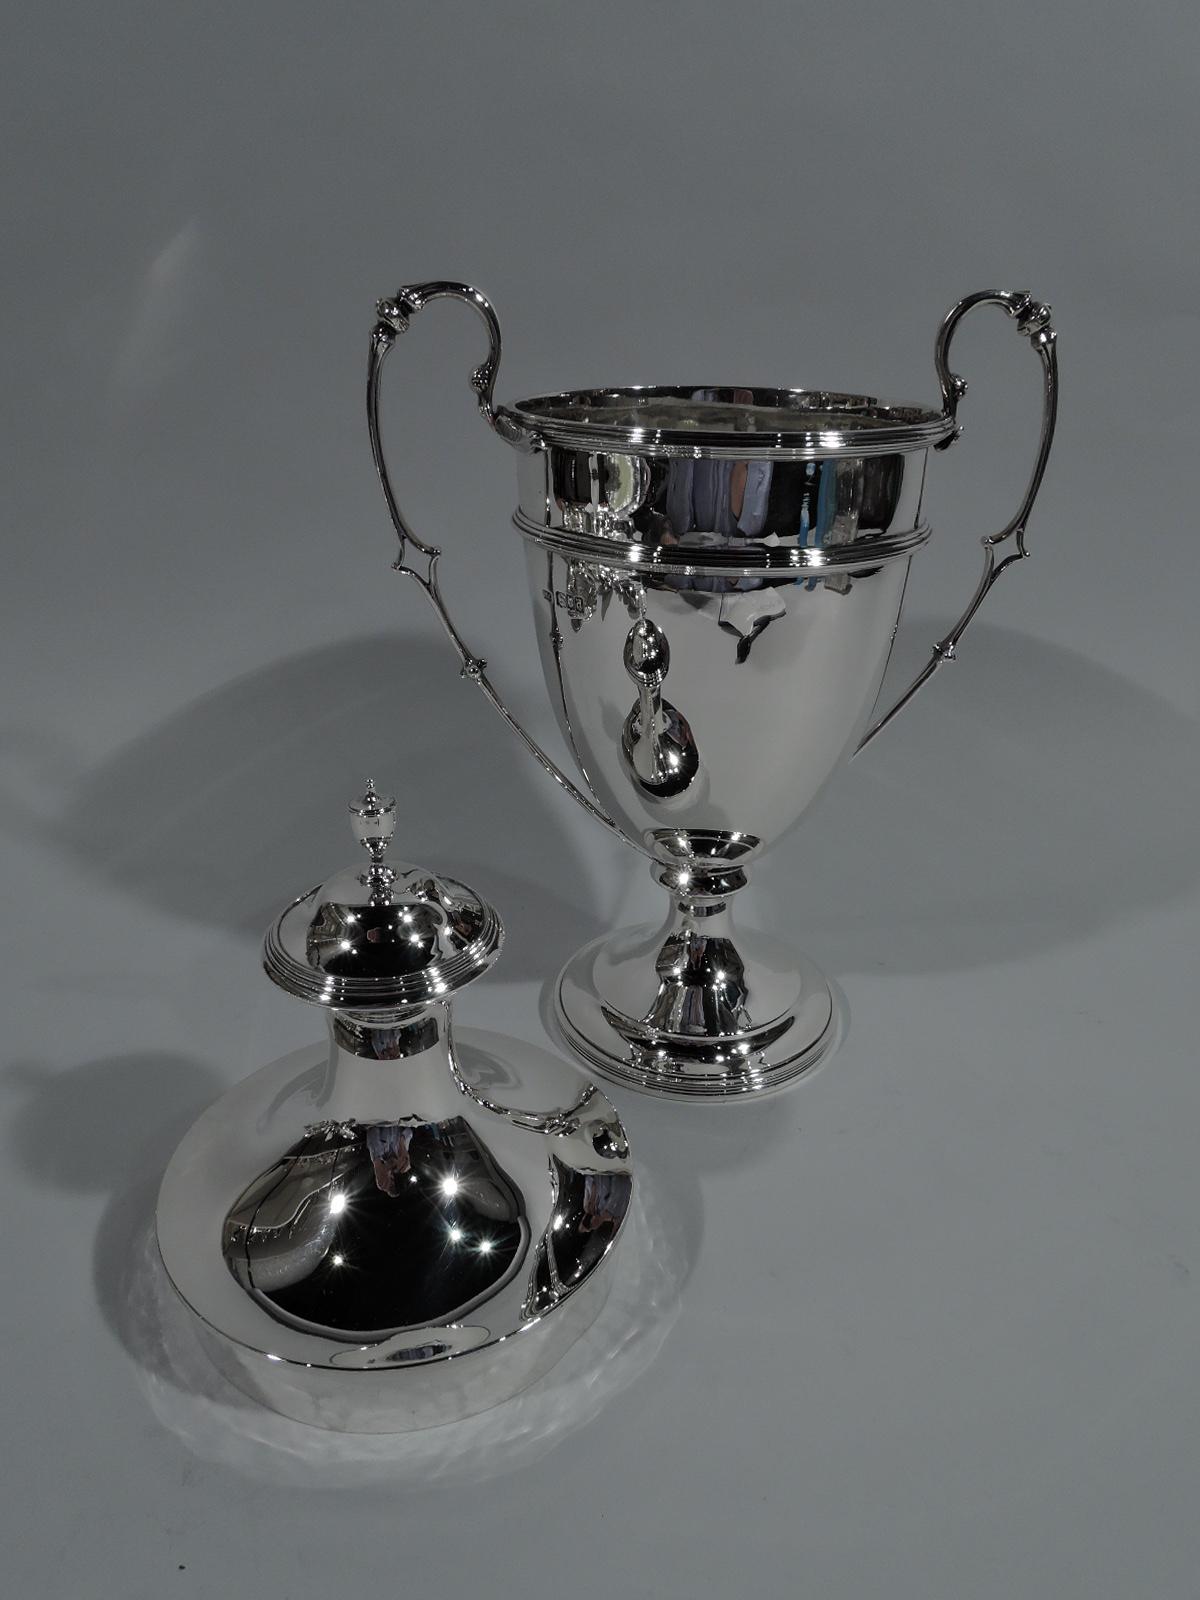 George V sterling silver trophy cup. Made by Lionel Alfred Crichton in London in 1916. Traditional amphora with ovoid body on knop on stepped foot. High-looping leaf-mounted side handles. Domed cover with vase finial. Lots of room for engraving with